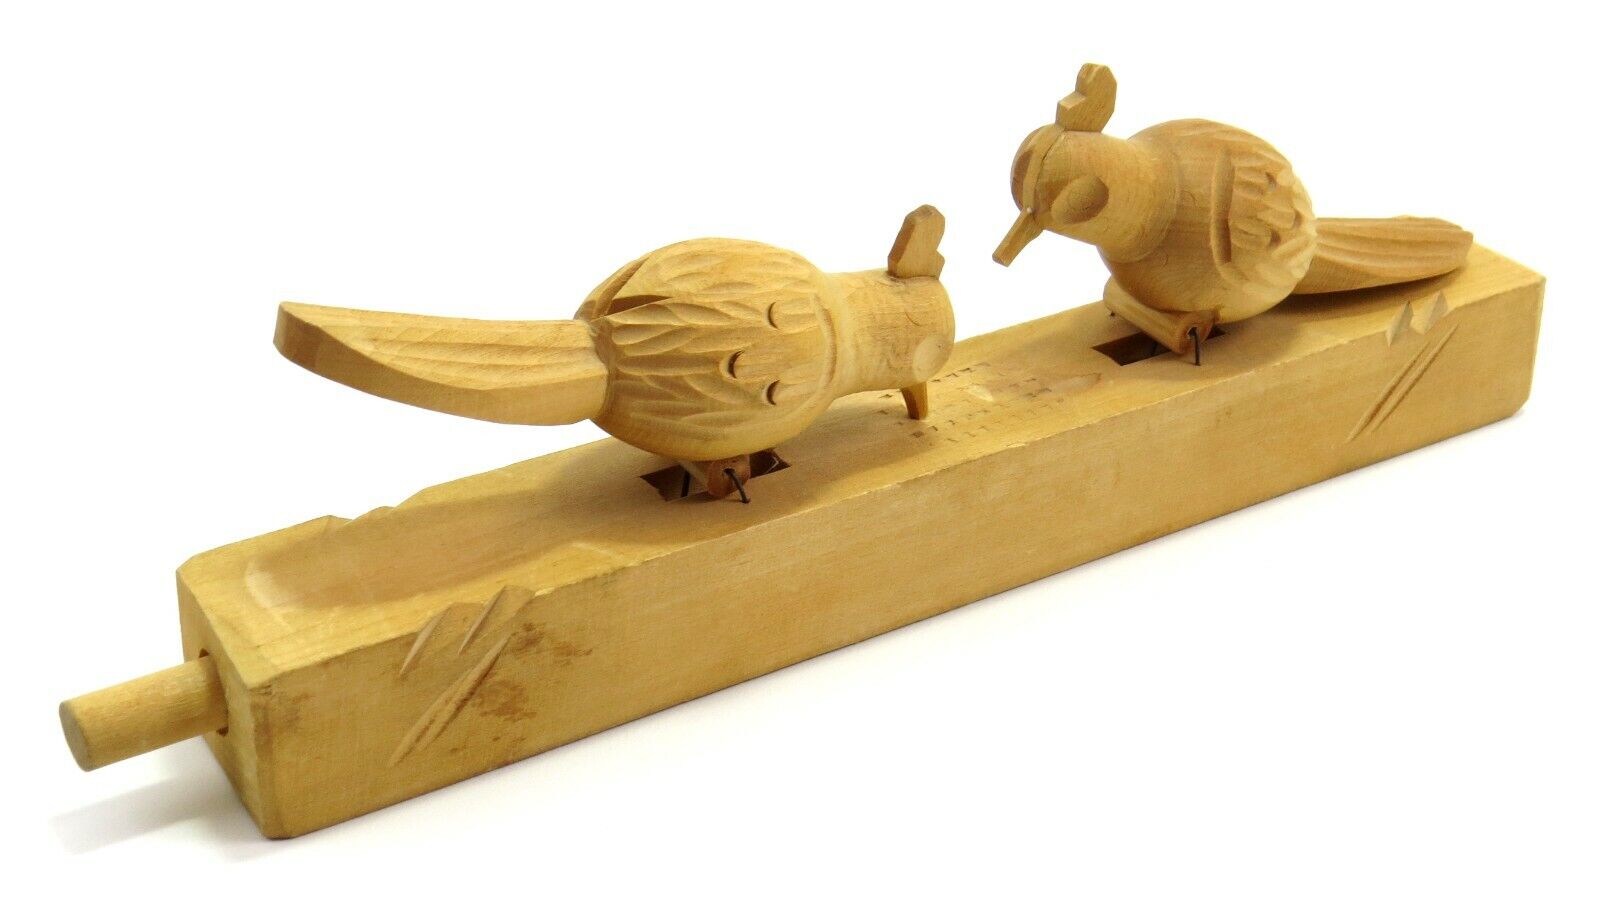 Russian Hand Carved Wood Mechanical Pushbutton Pecking Bird Action Toy, Read